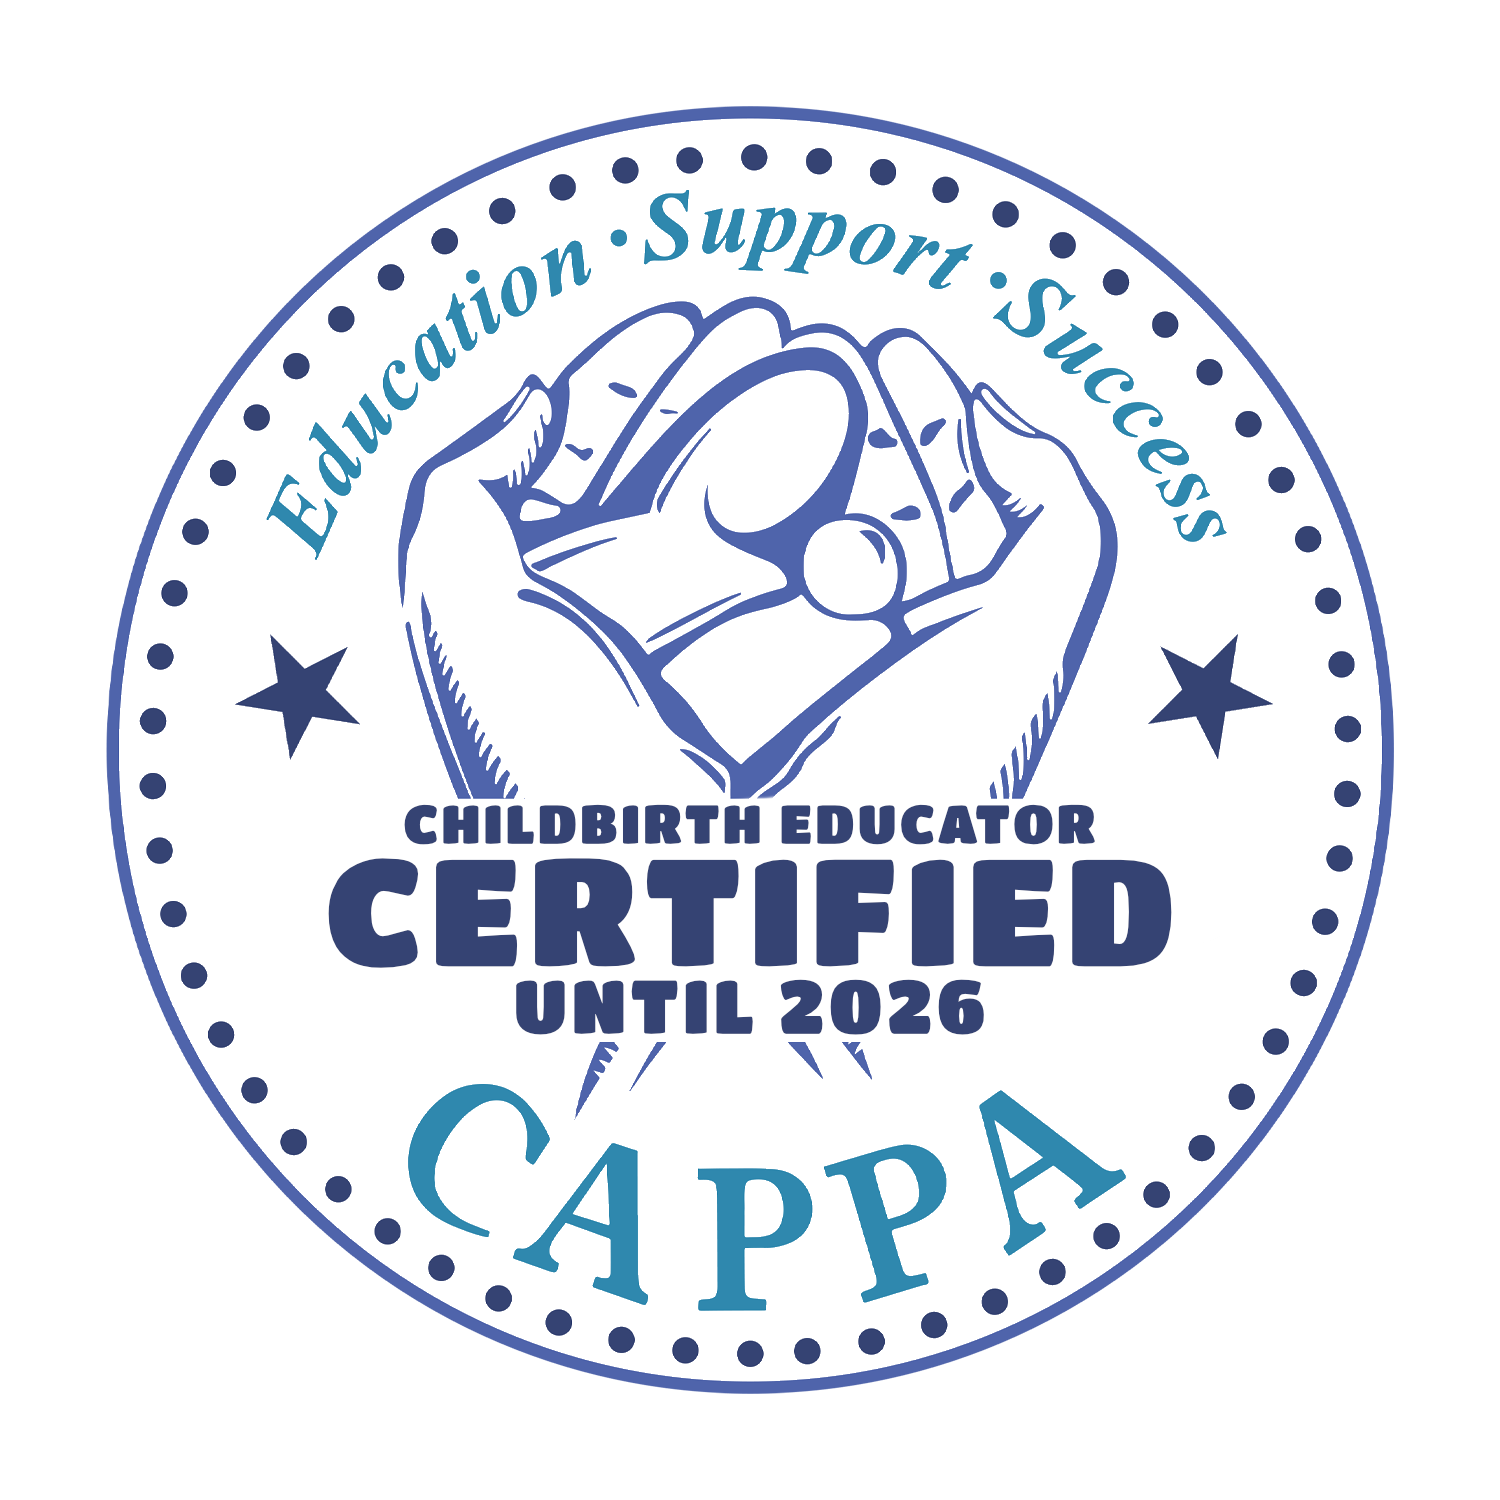 ccce-certified-badge-2026 (1).png